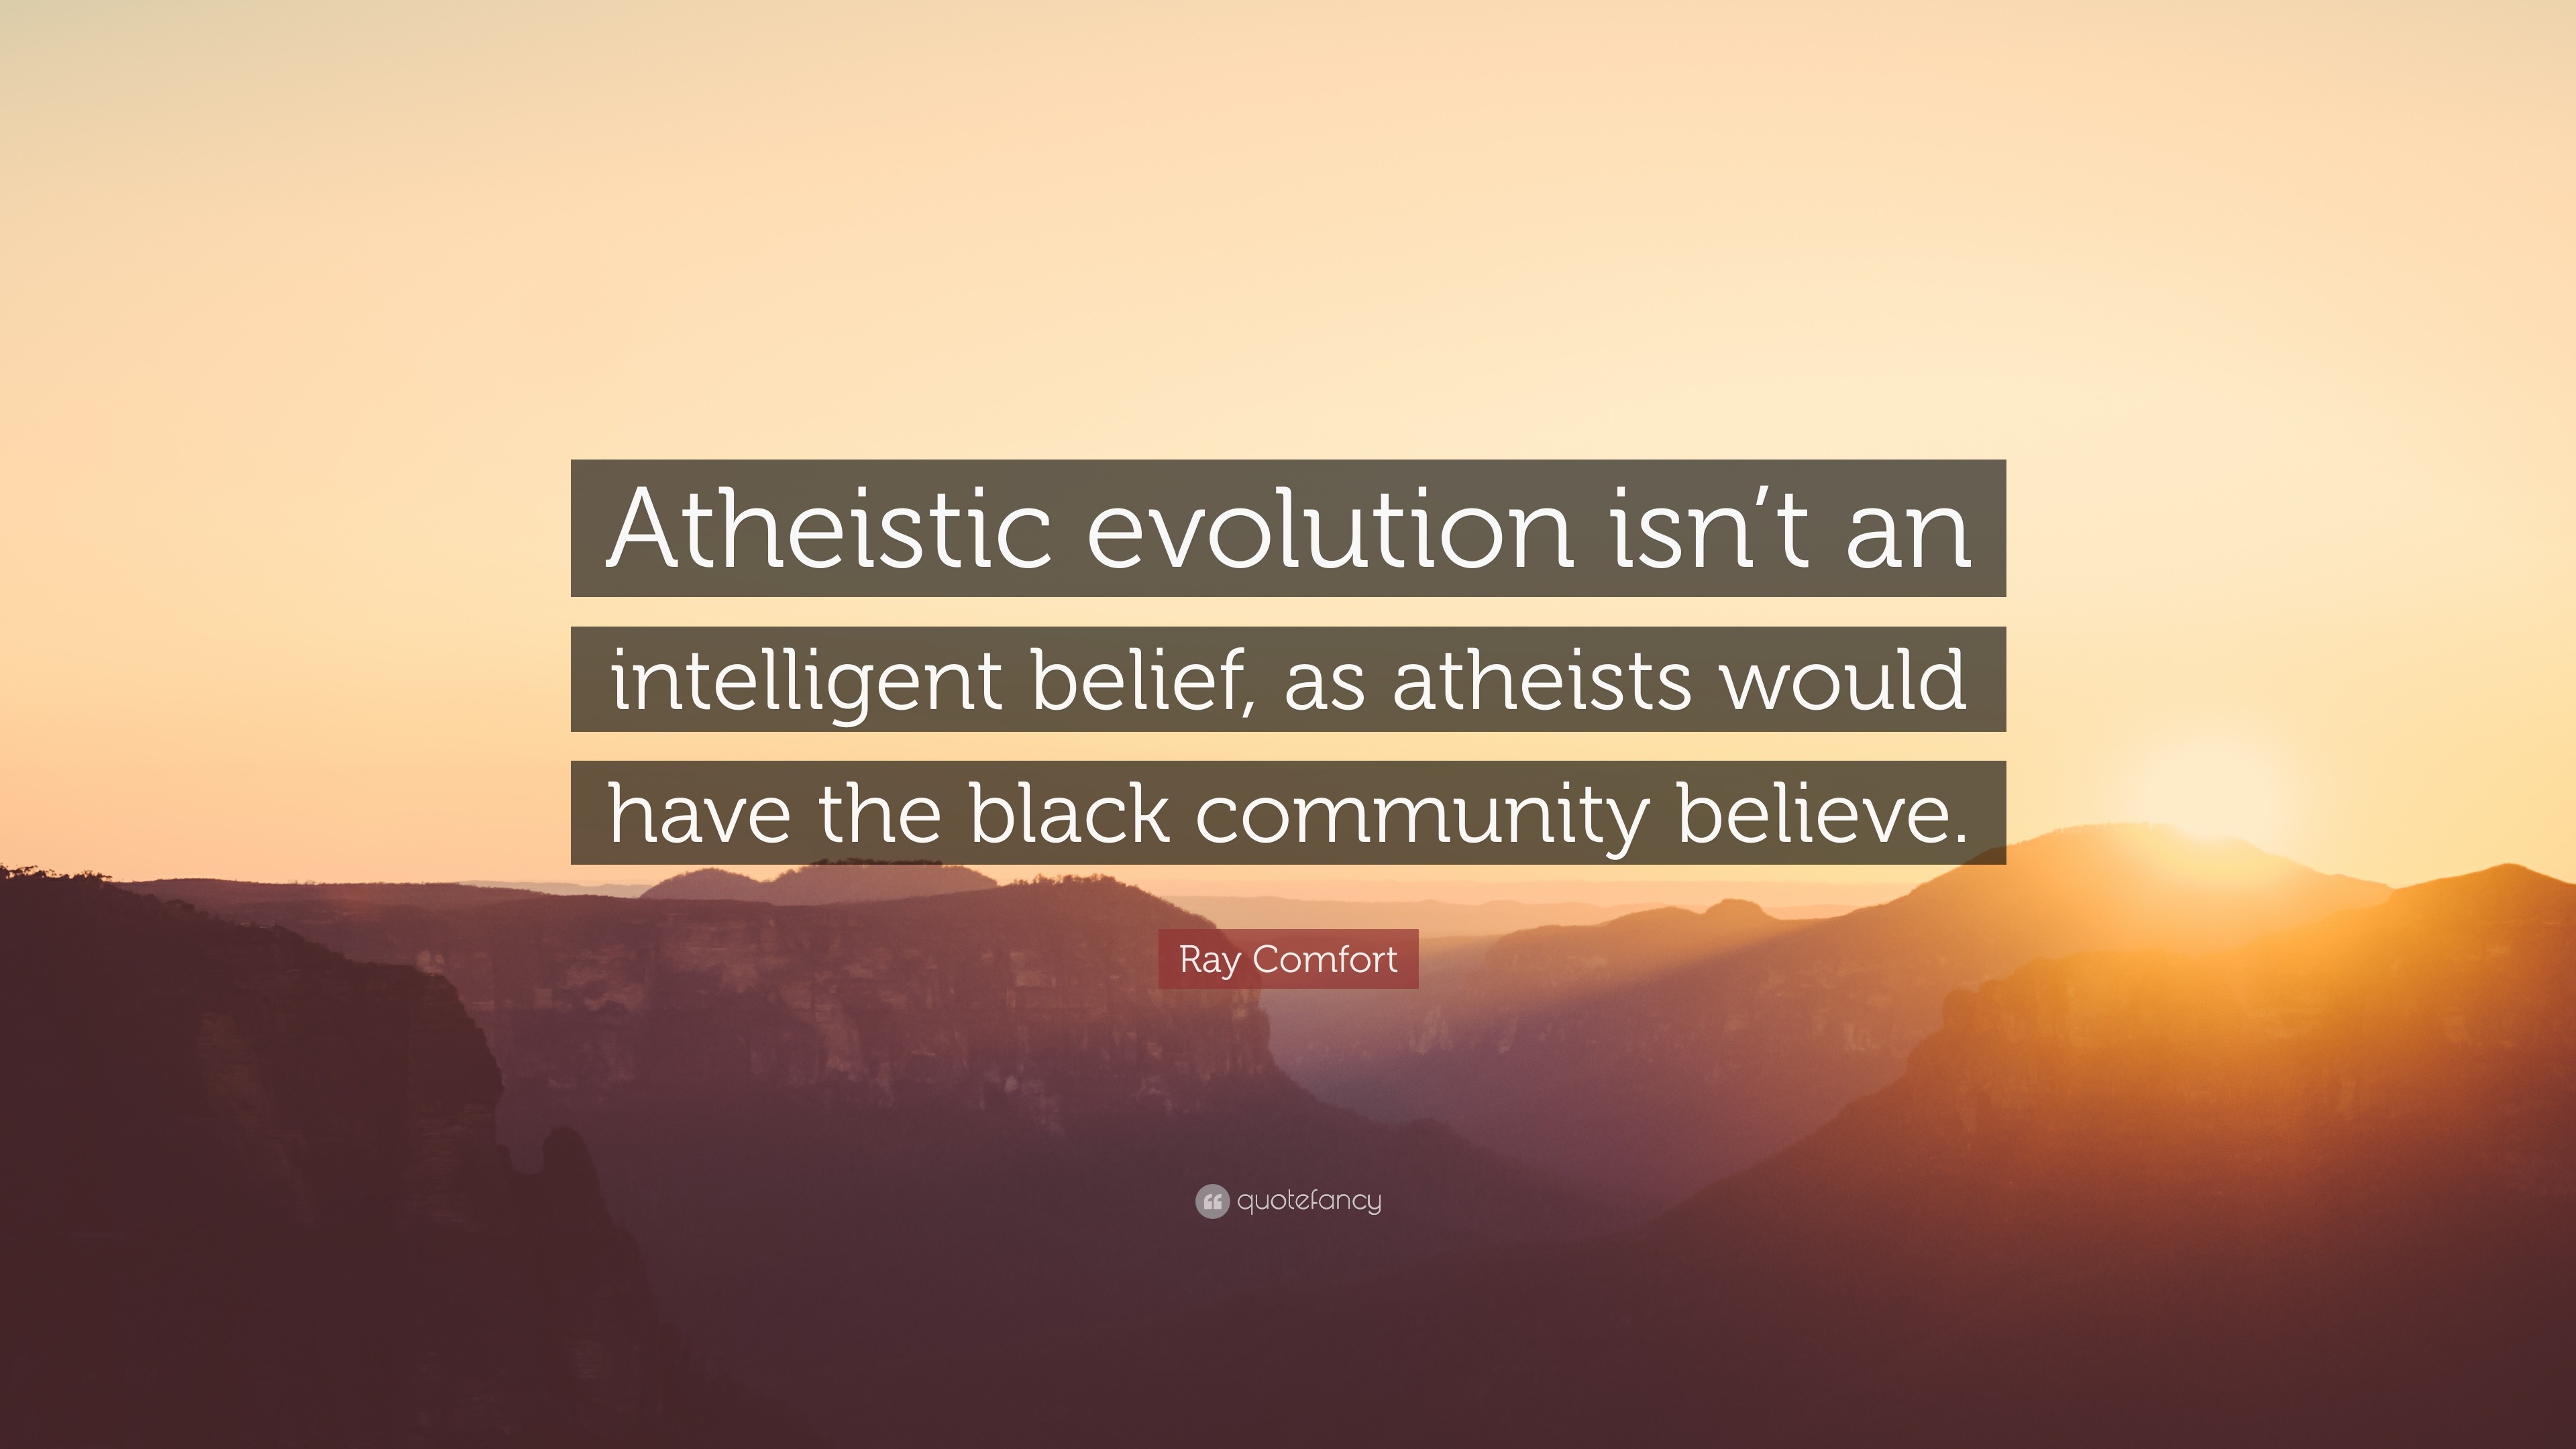 Ray Comfort Quote: “Evolution is unobservable. It's based on blind